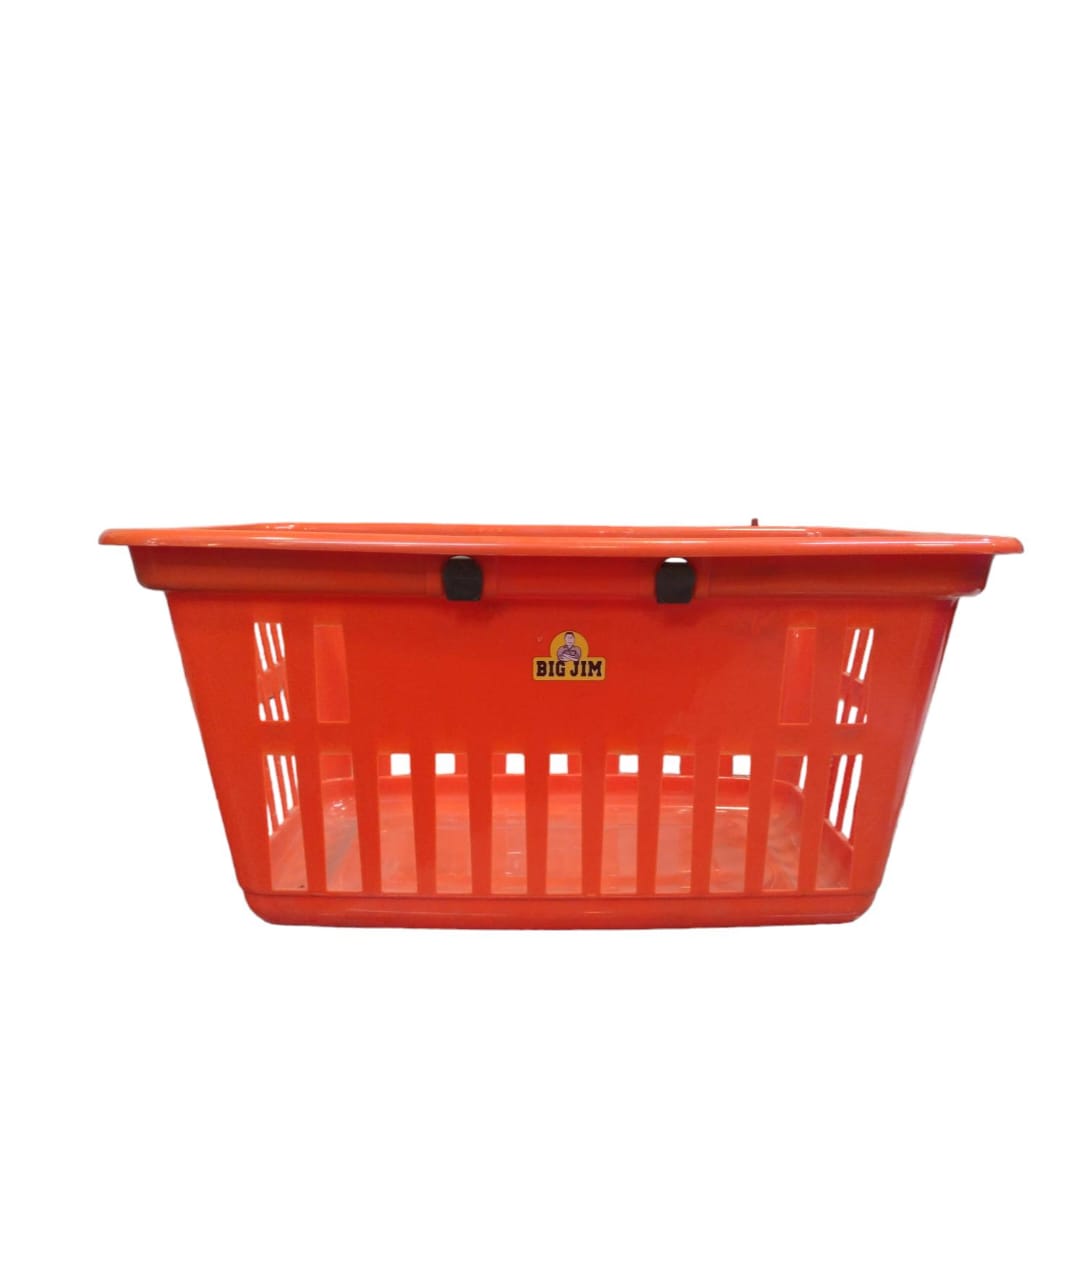 Big Jim Plastic Shopping Basket Medium Size with Carry Handle Assorted